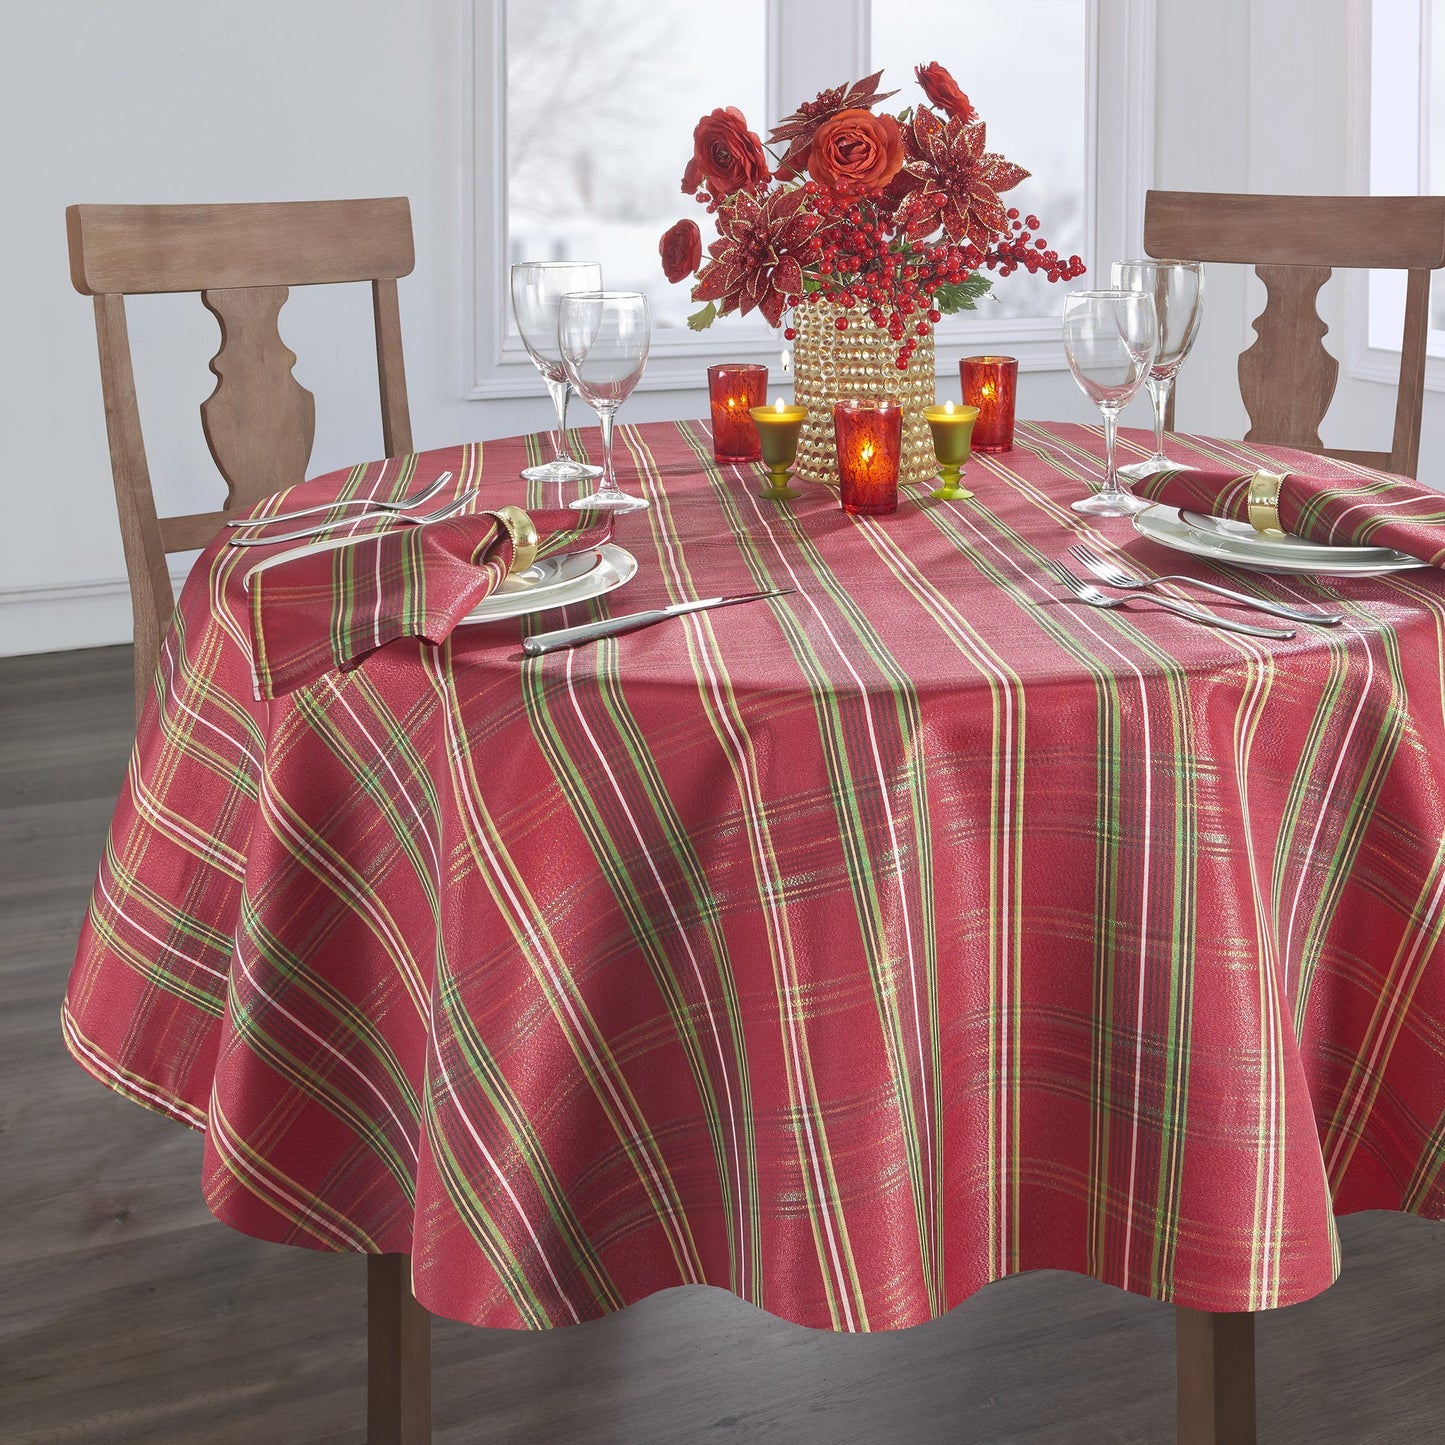 Shimmering Plaid Tablecloth